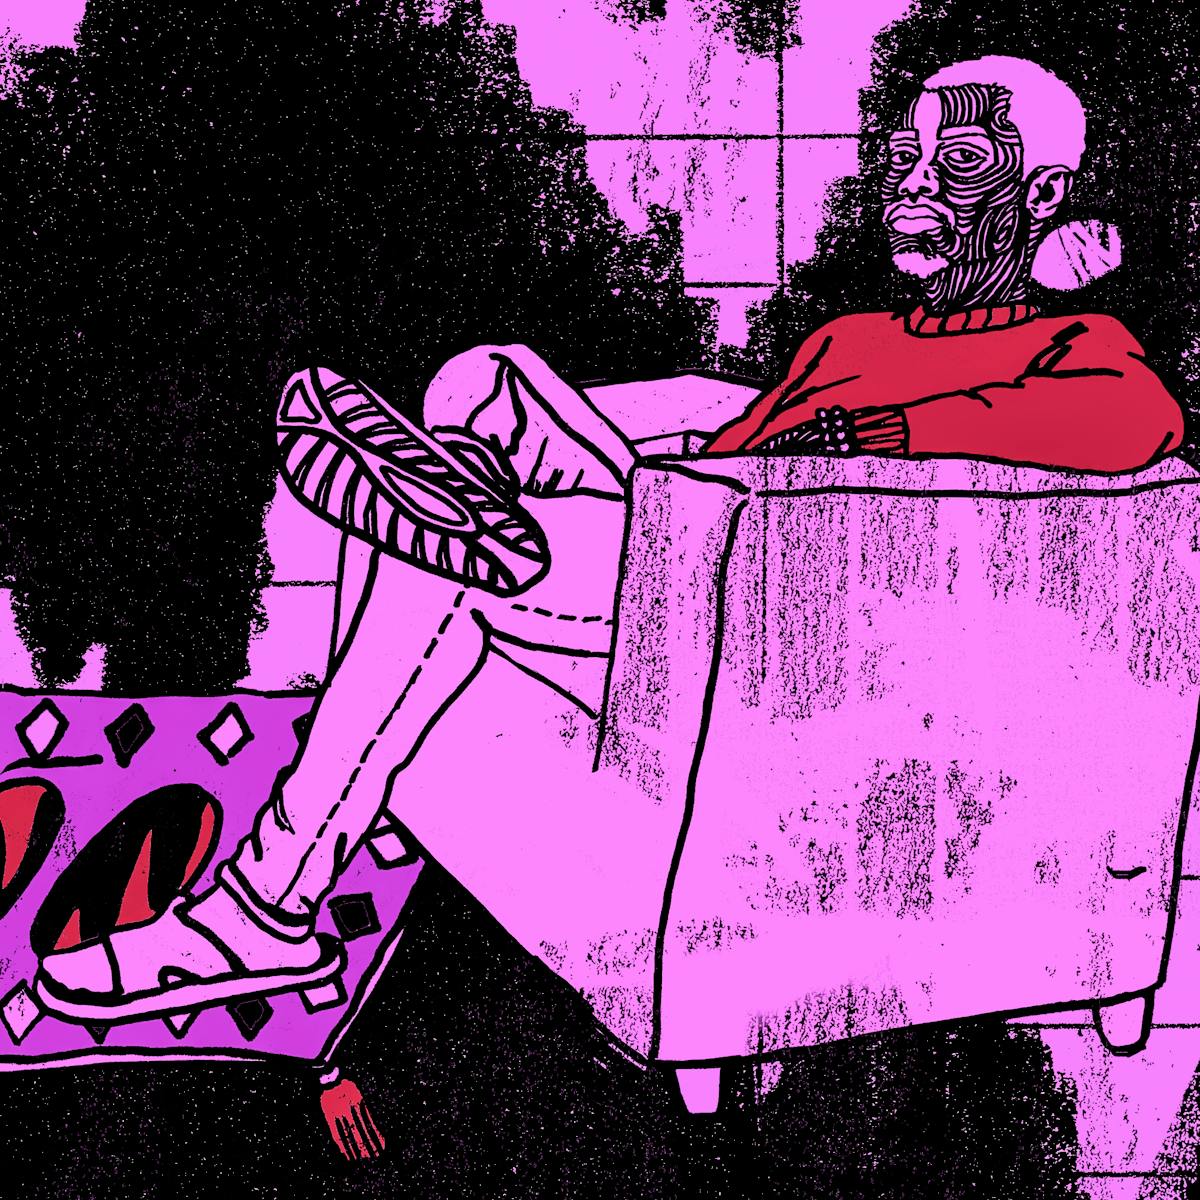 Illustration in black, purple and red tones, showing a person sitting in an armchair in a room. At their feet is a ruckled rug with things hidden under it. To the left is a small bookcase and house plant.